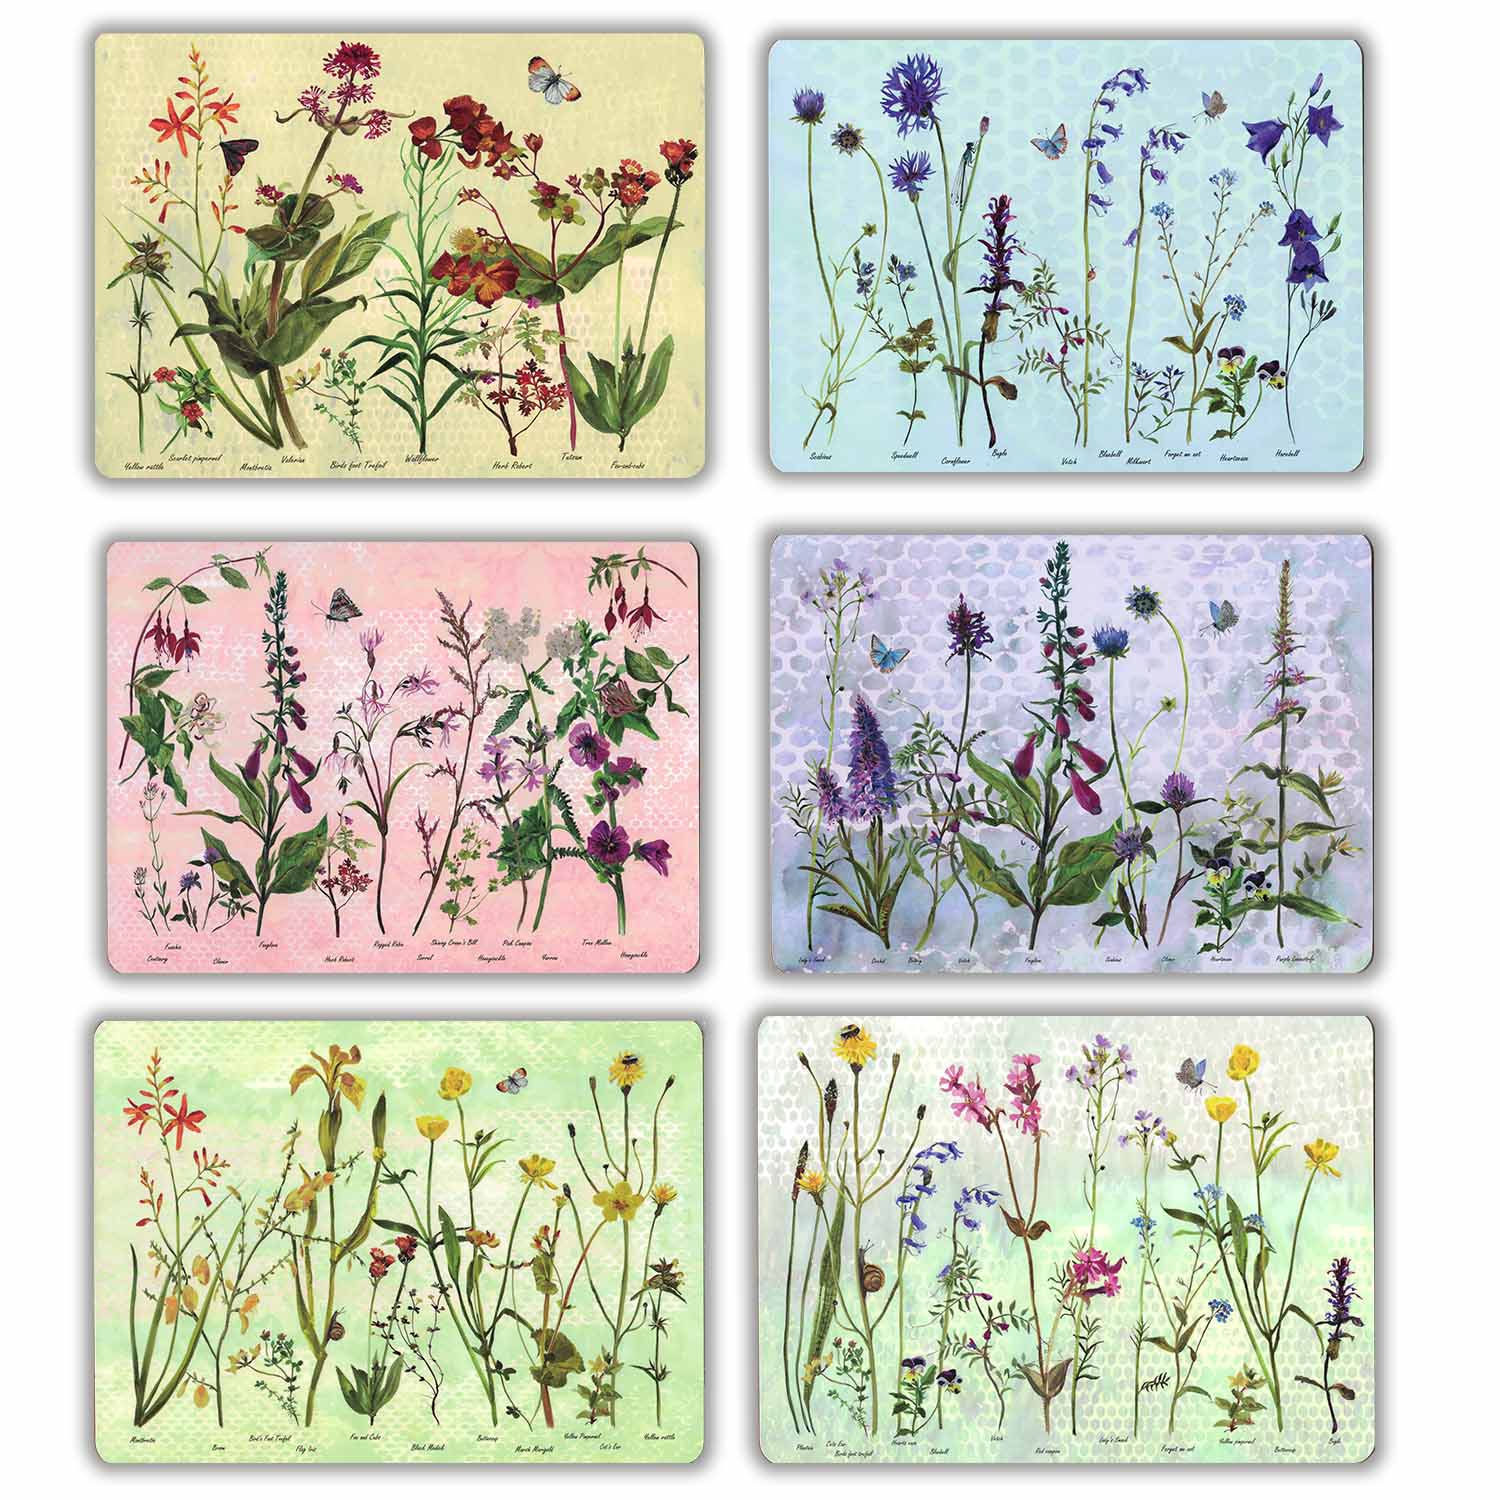 Annabel Langrish, Wildflowers 6 Placemats and Giftbox Set